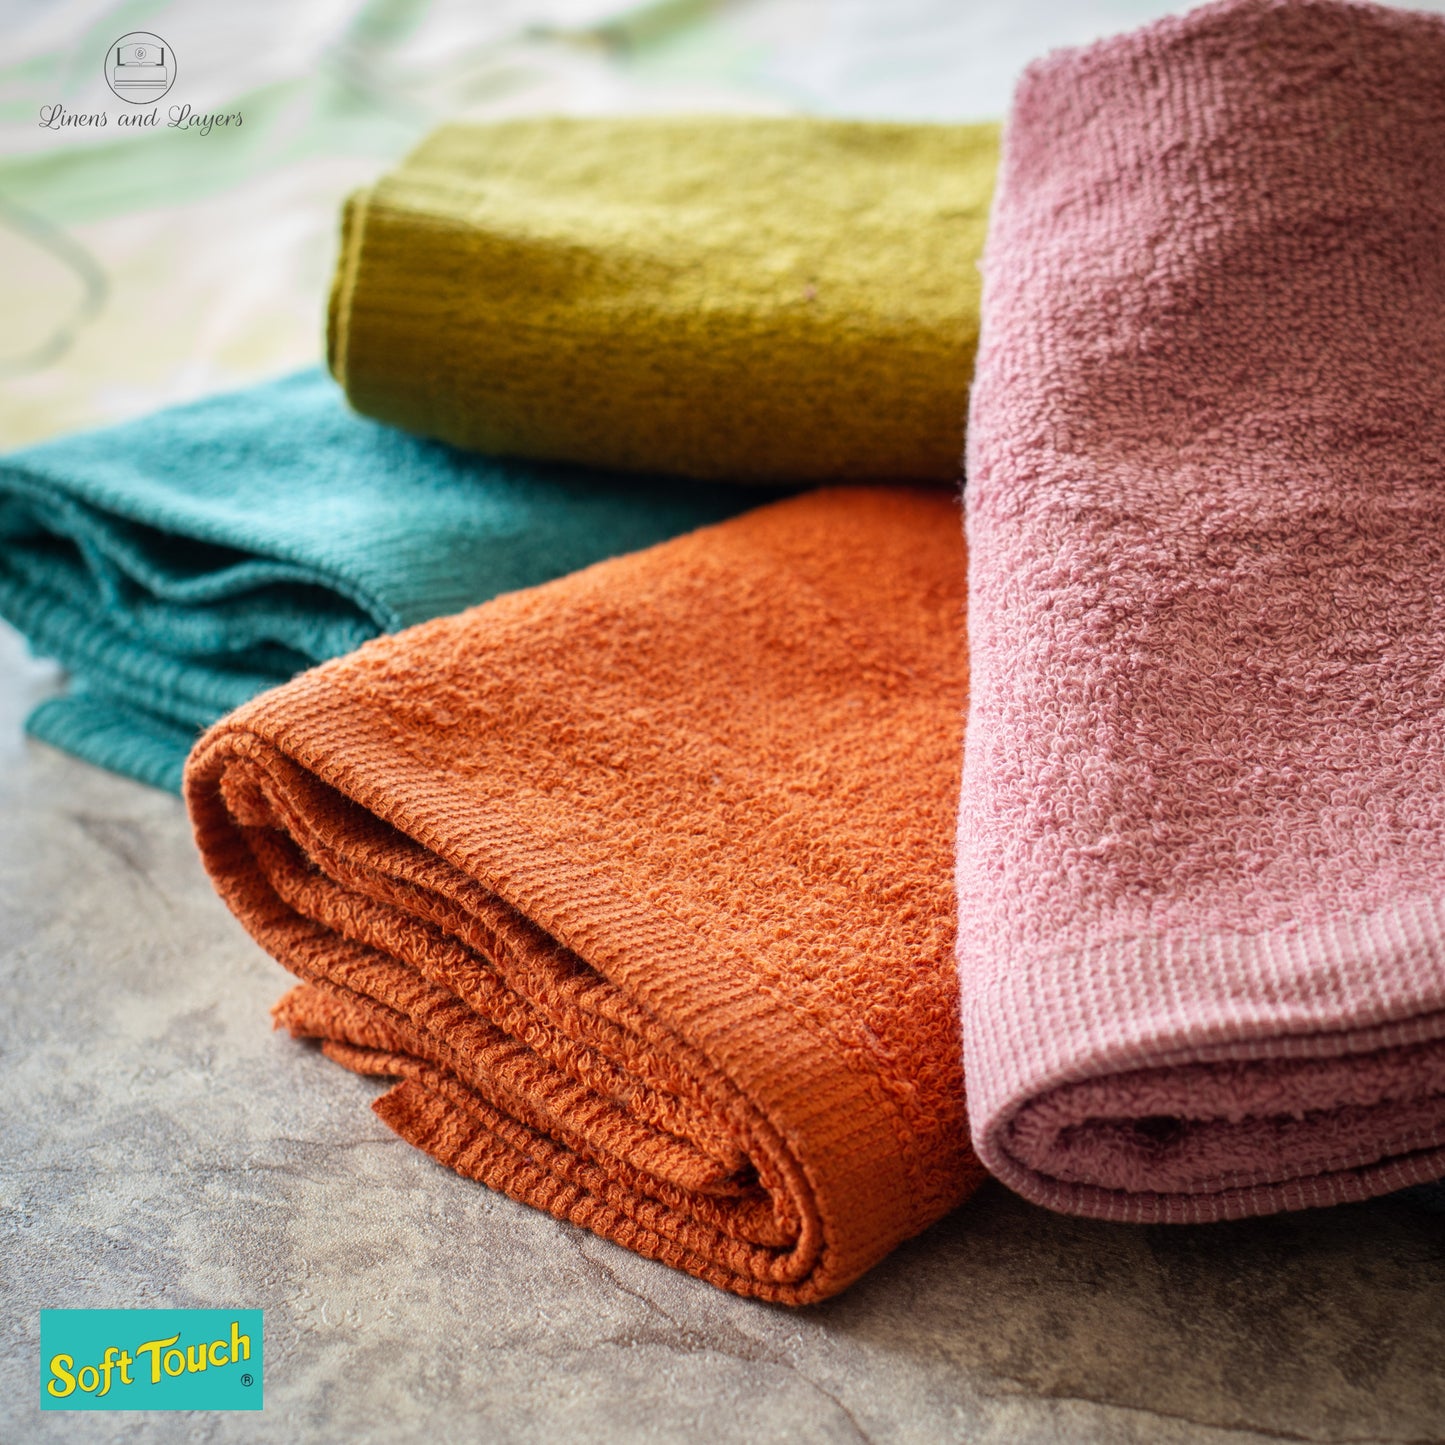 Soft Touch Hand Towel (390 GSM) - H-1330 Terrycloth - 13x30 inches